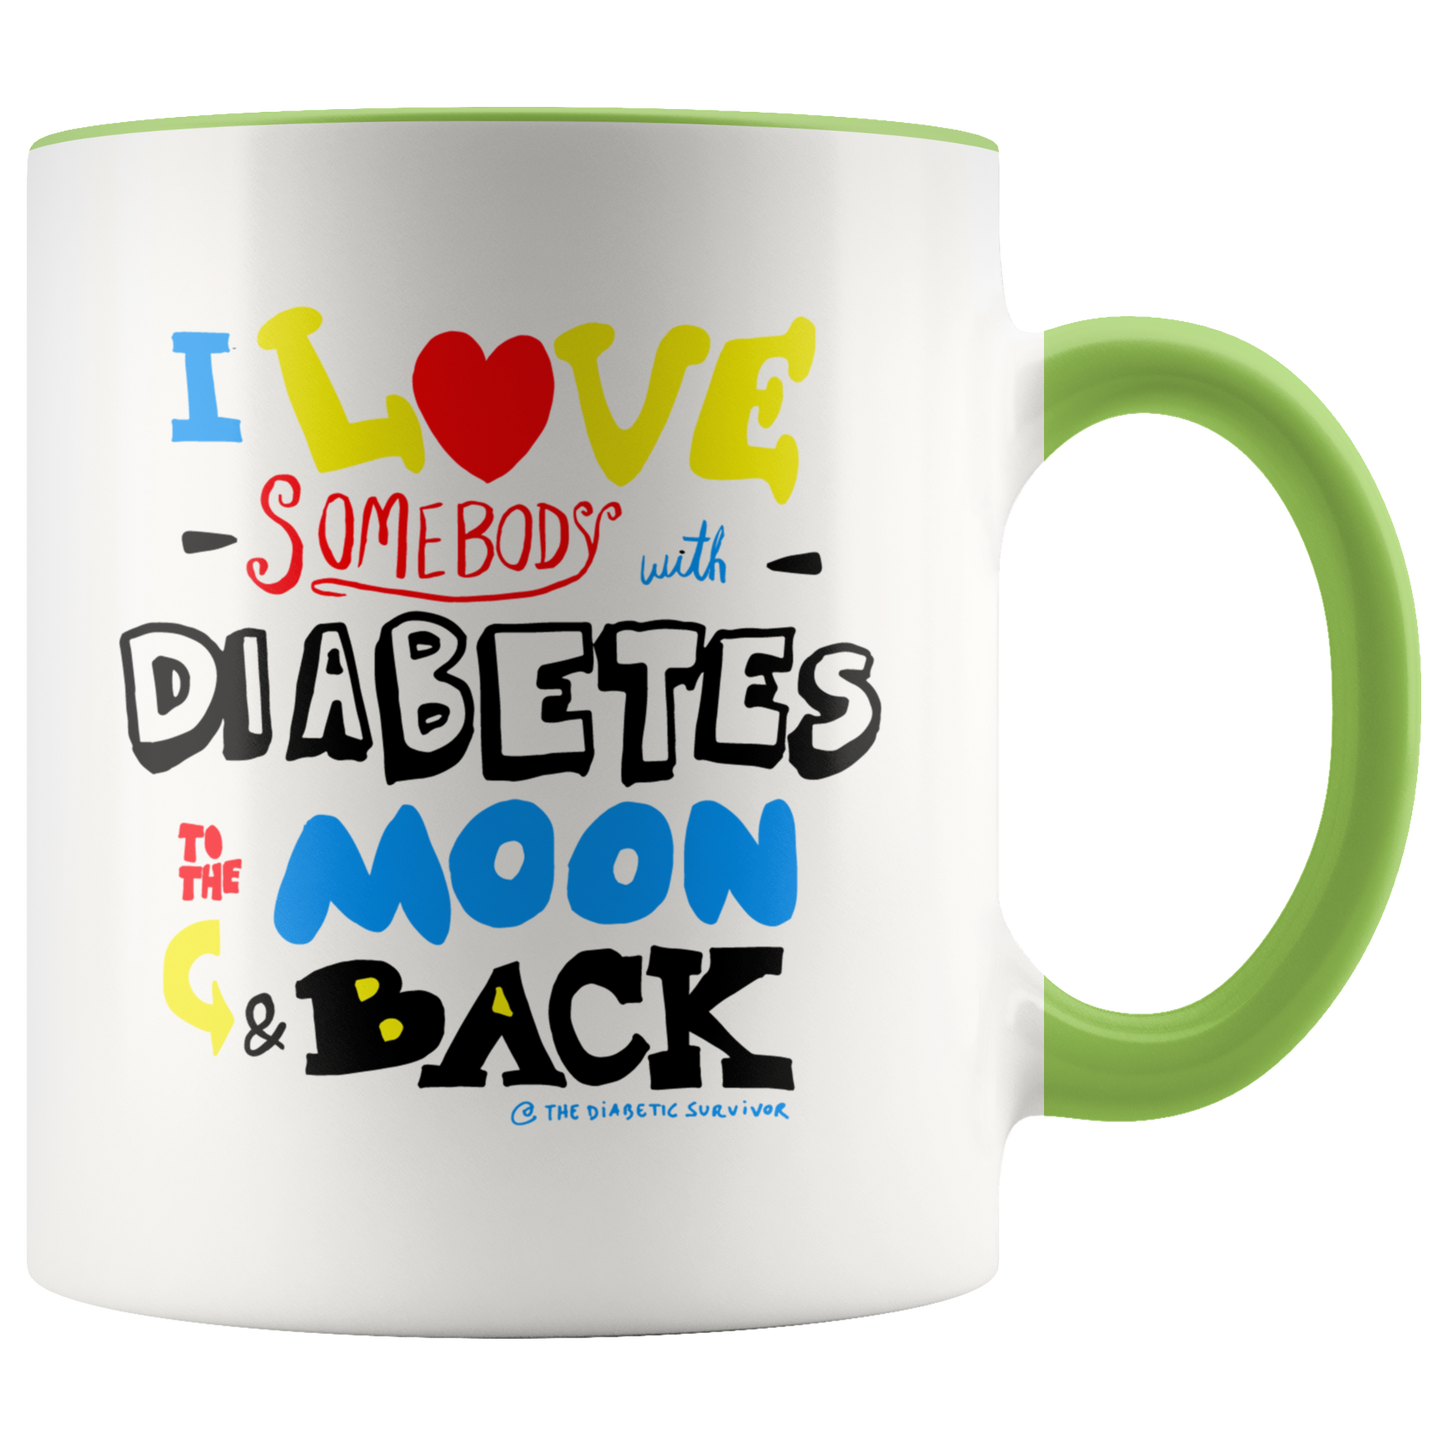 I love someone with diabetes type 1